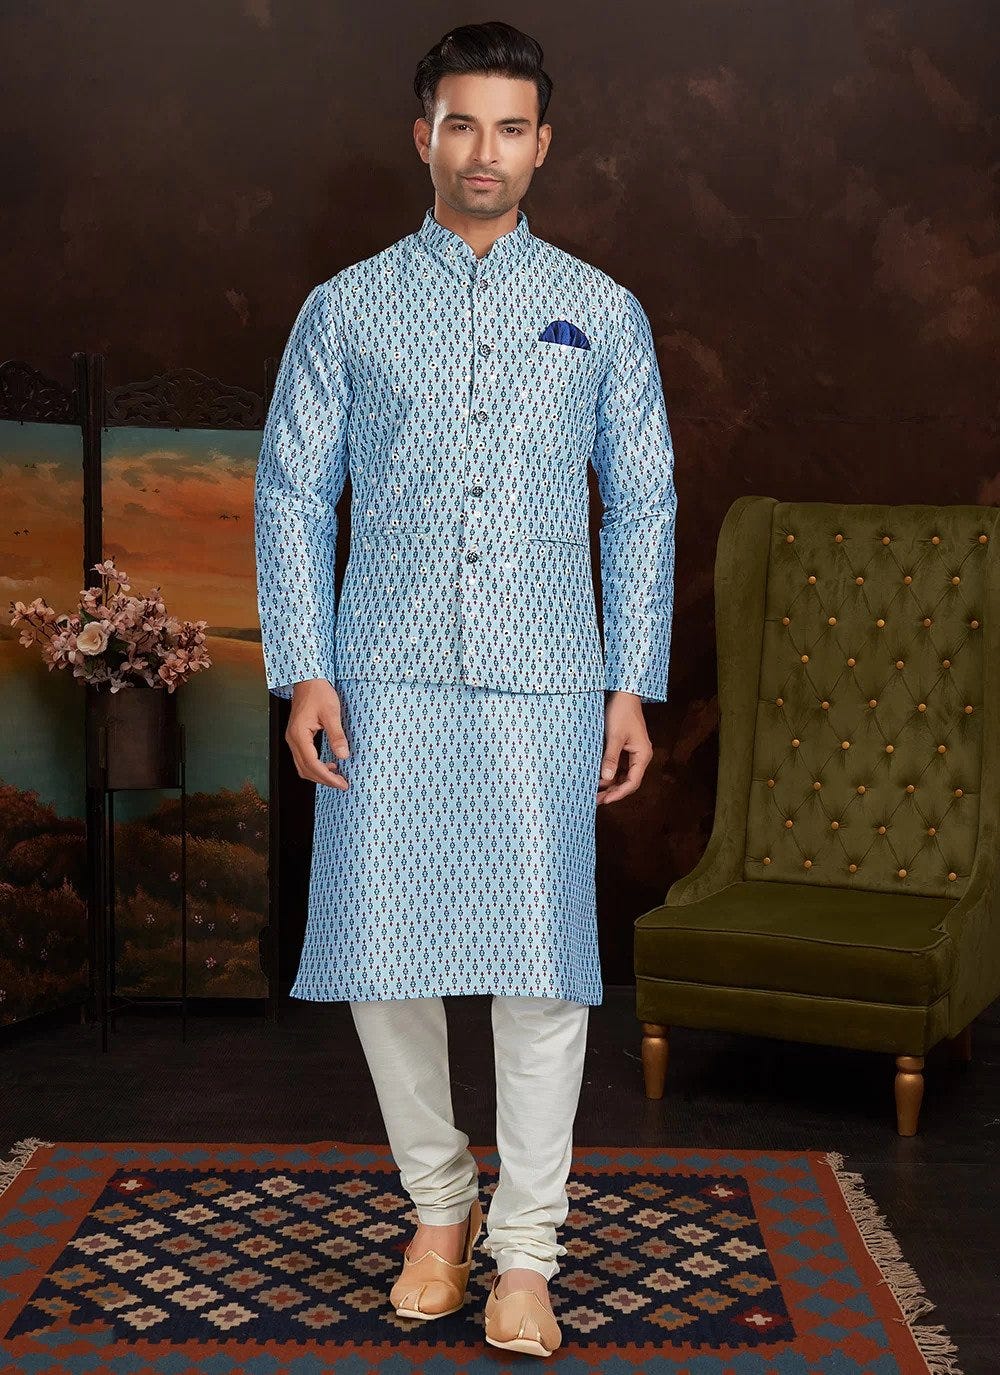 Enjoy The Most Elegant Mens Indian Outfits For Weddings With Salwari Fashion  men collection, by Salwari fashion